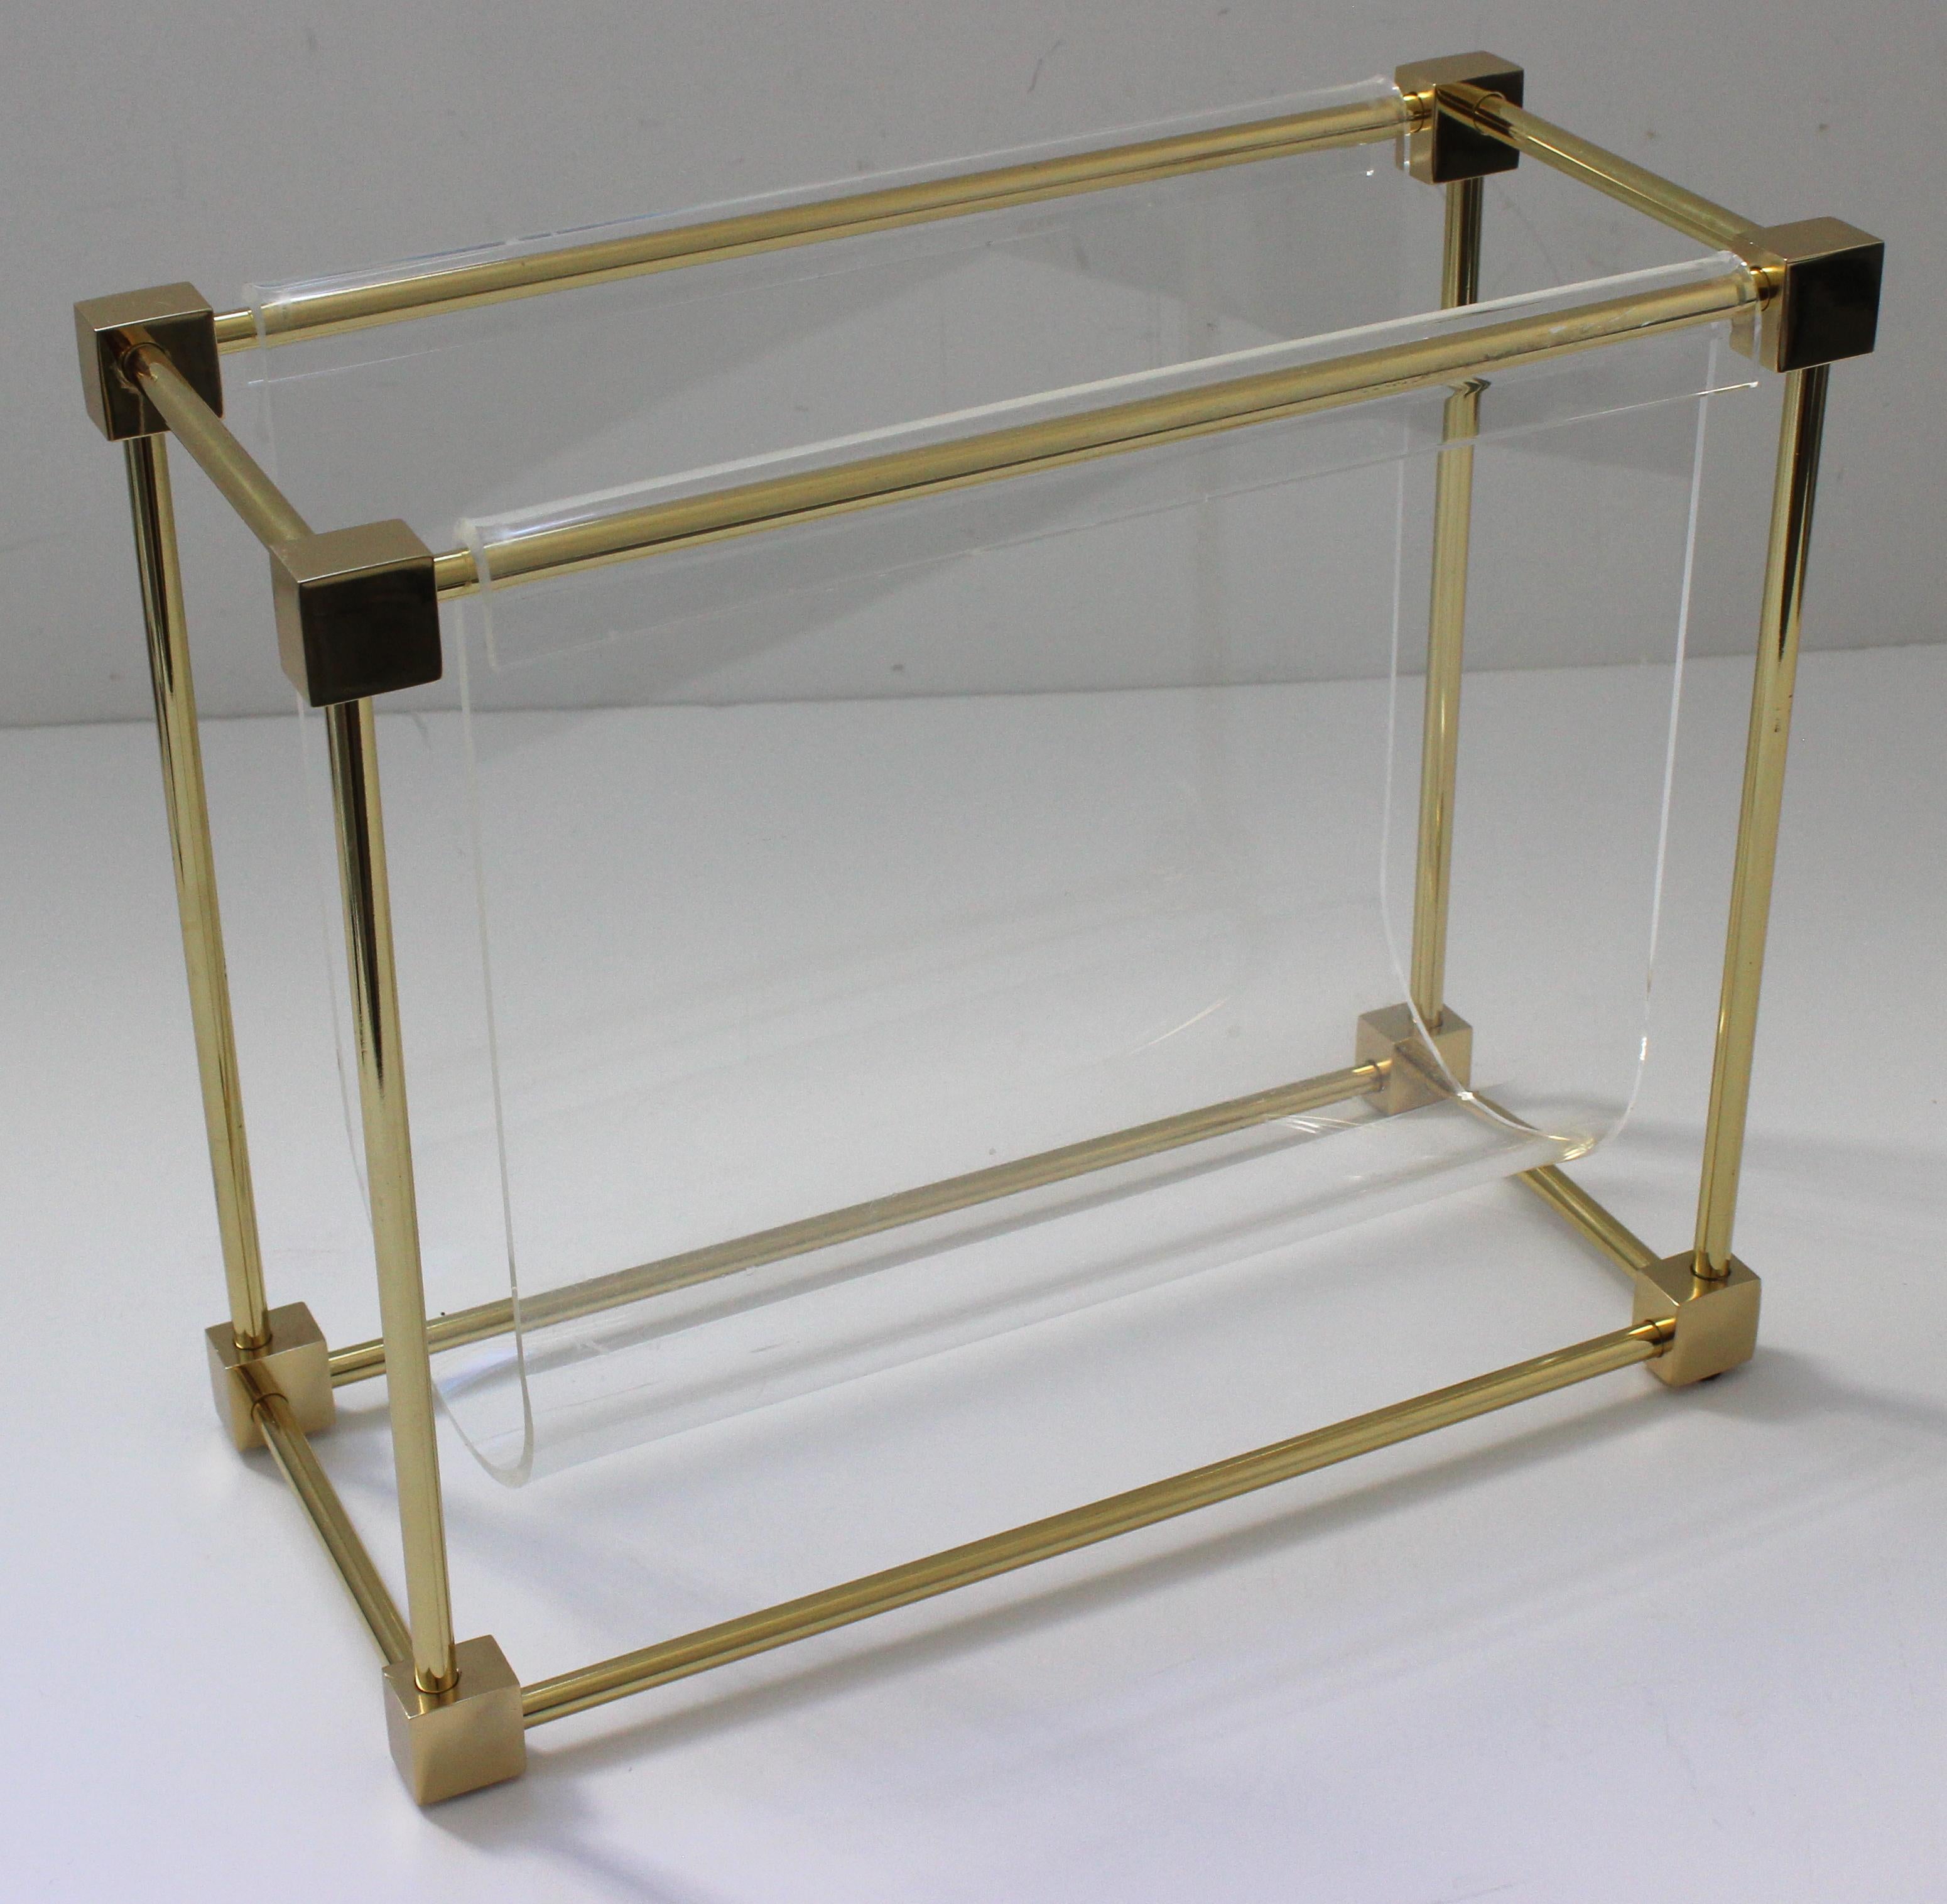 This stylish and chic lucite and brass magazine holder was created in the late 1970s and was designed by the American furniture designer Charles Hollis Jones.

Note: The brass has been professionally polished and finished with a clear lacquer (so